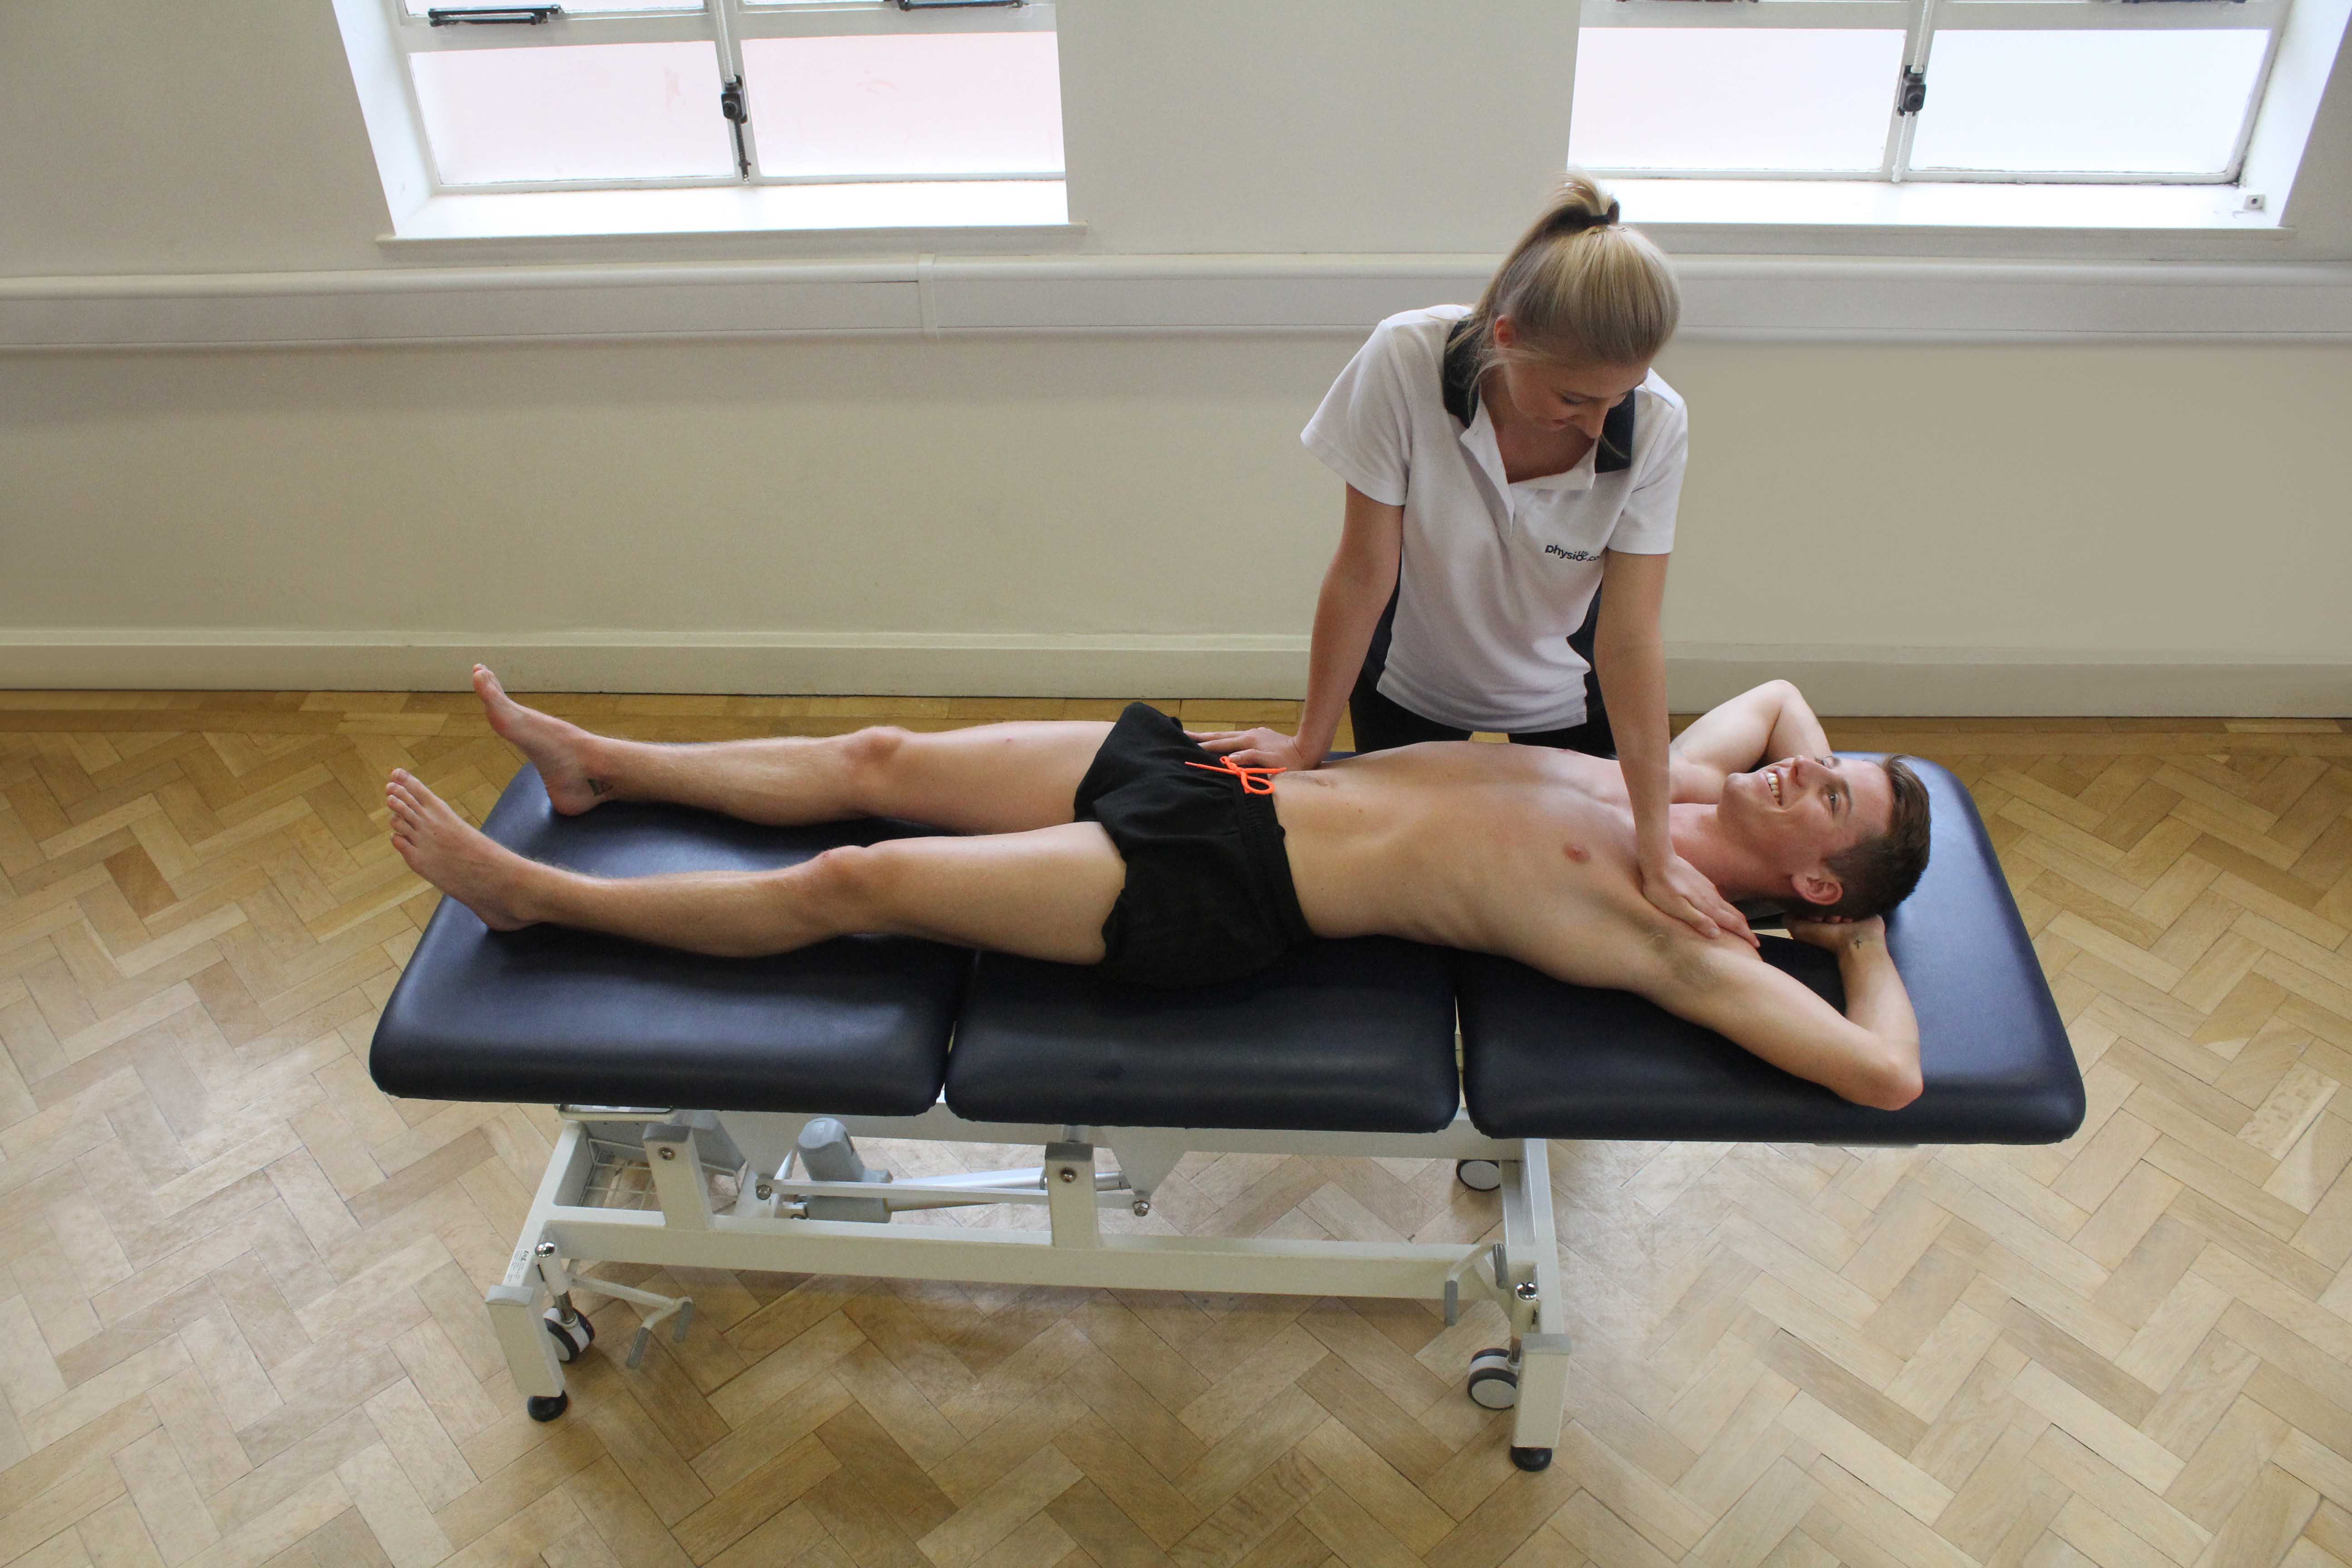 Experienced MSK therapist applying traction to stretch connective tissues and relieve stiffness